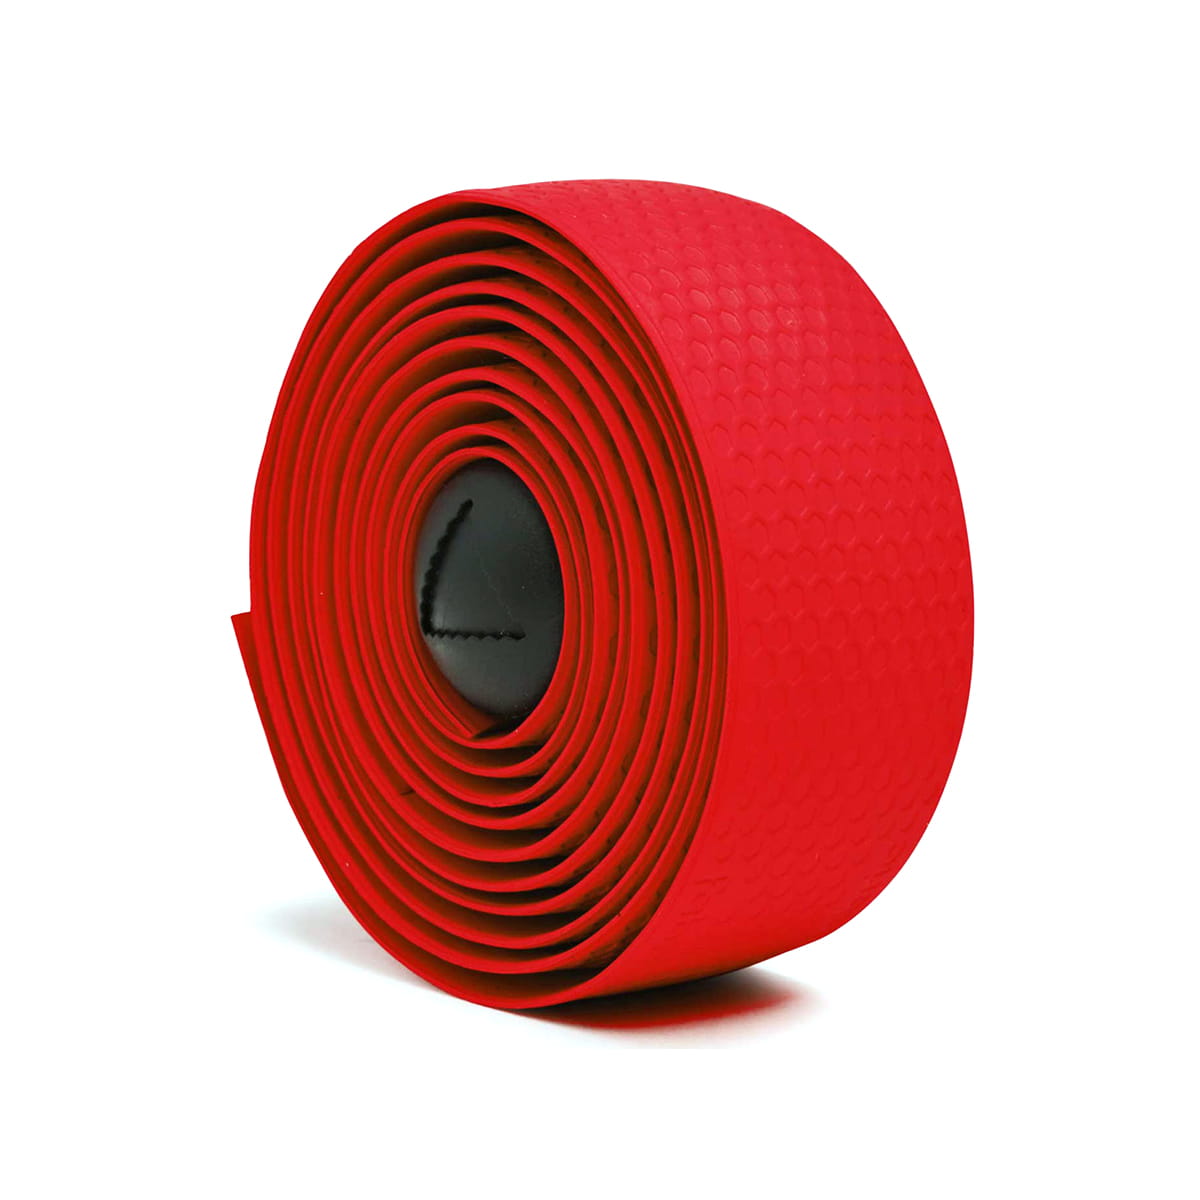 Fabric+Bicycle+Silicone+Bar+Bike+Tape+Red for sale online